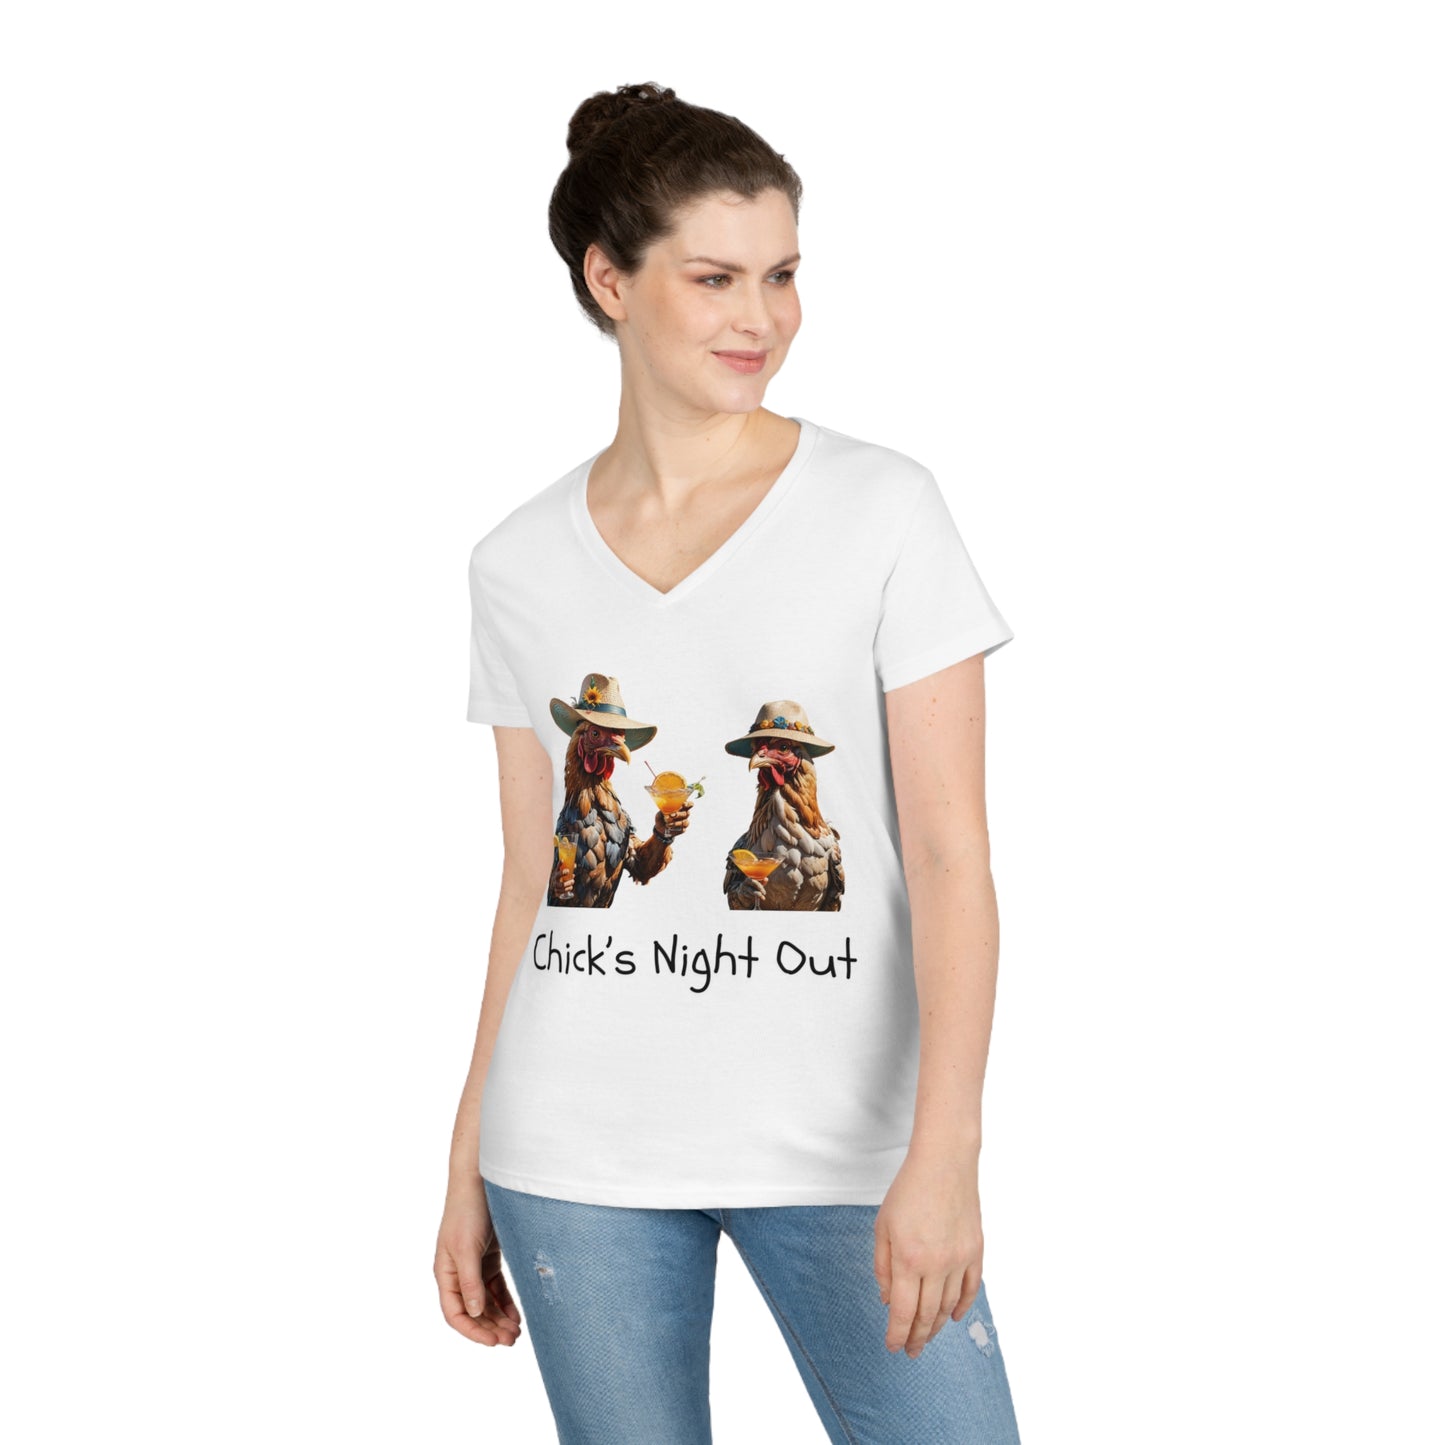 Chicken Squad: Chicks Night Out - Ladies' V-Neck T-Shirt